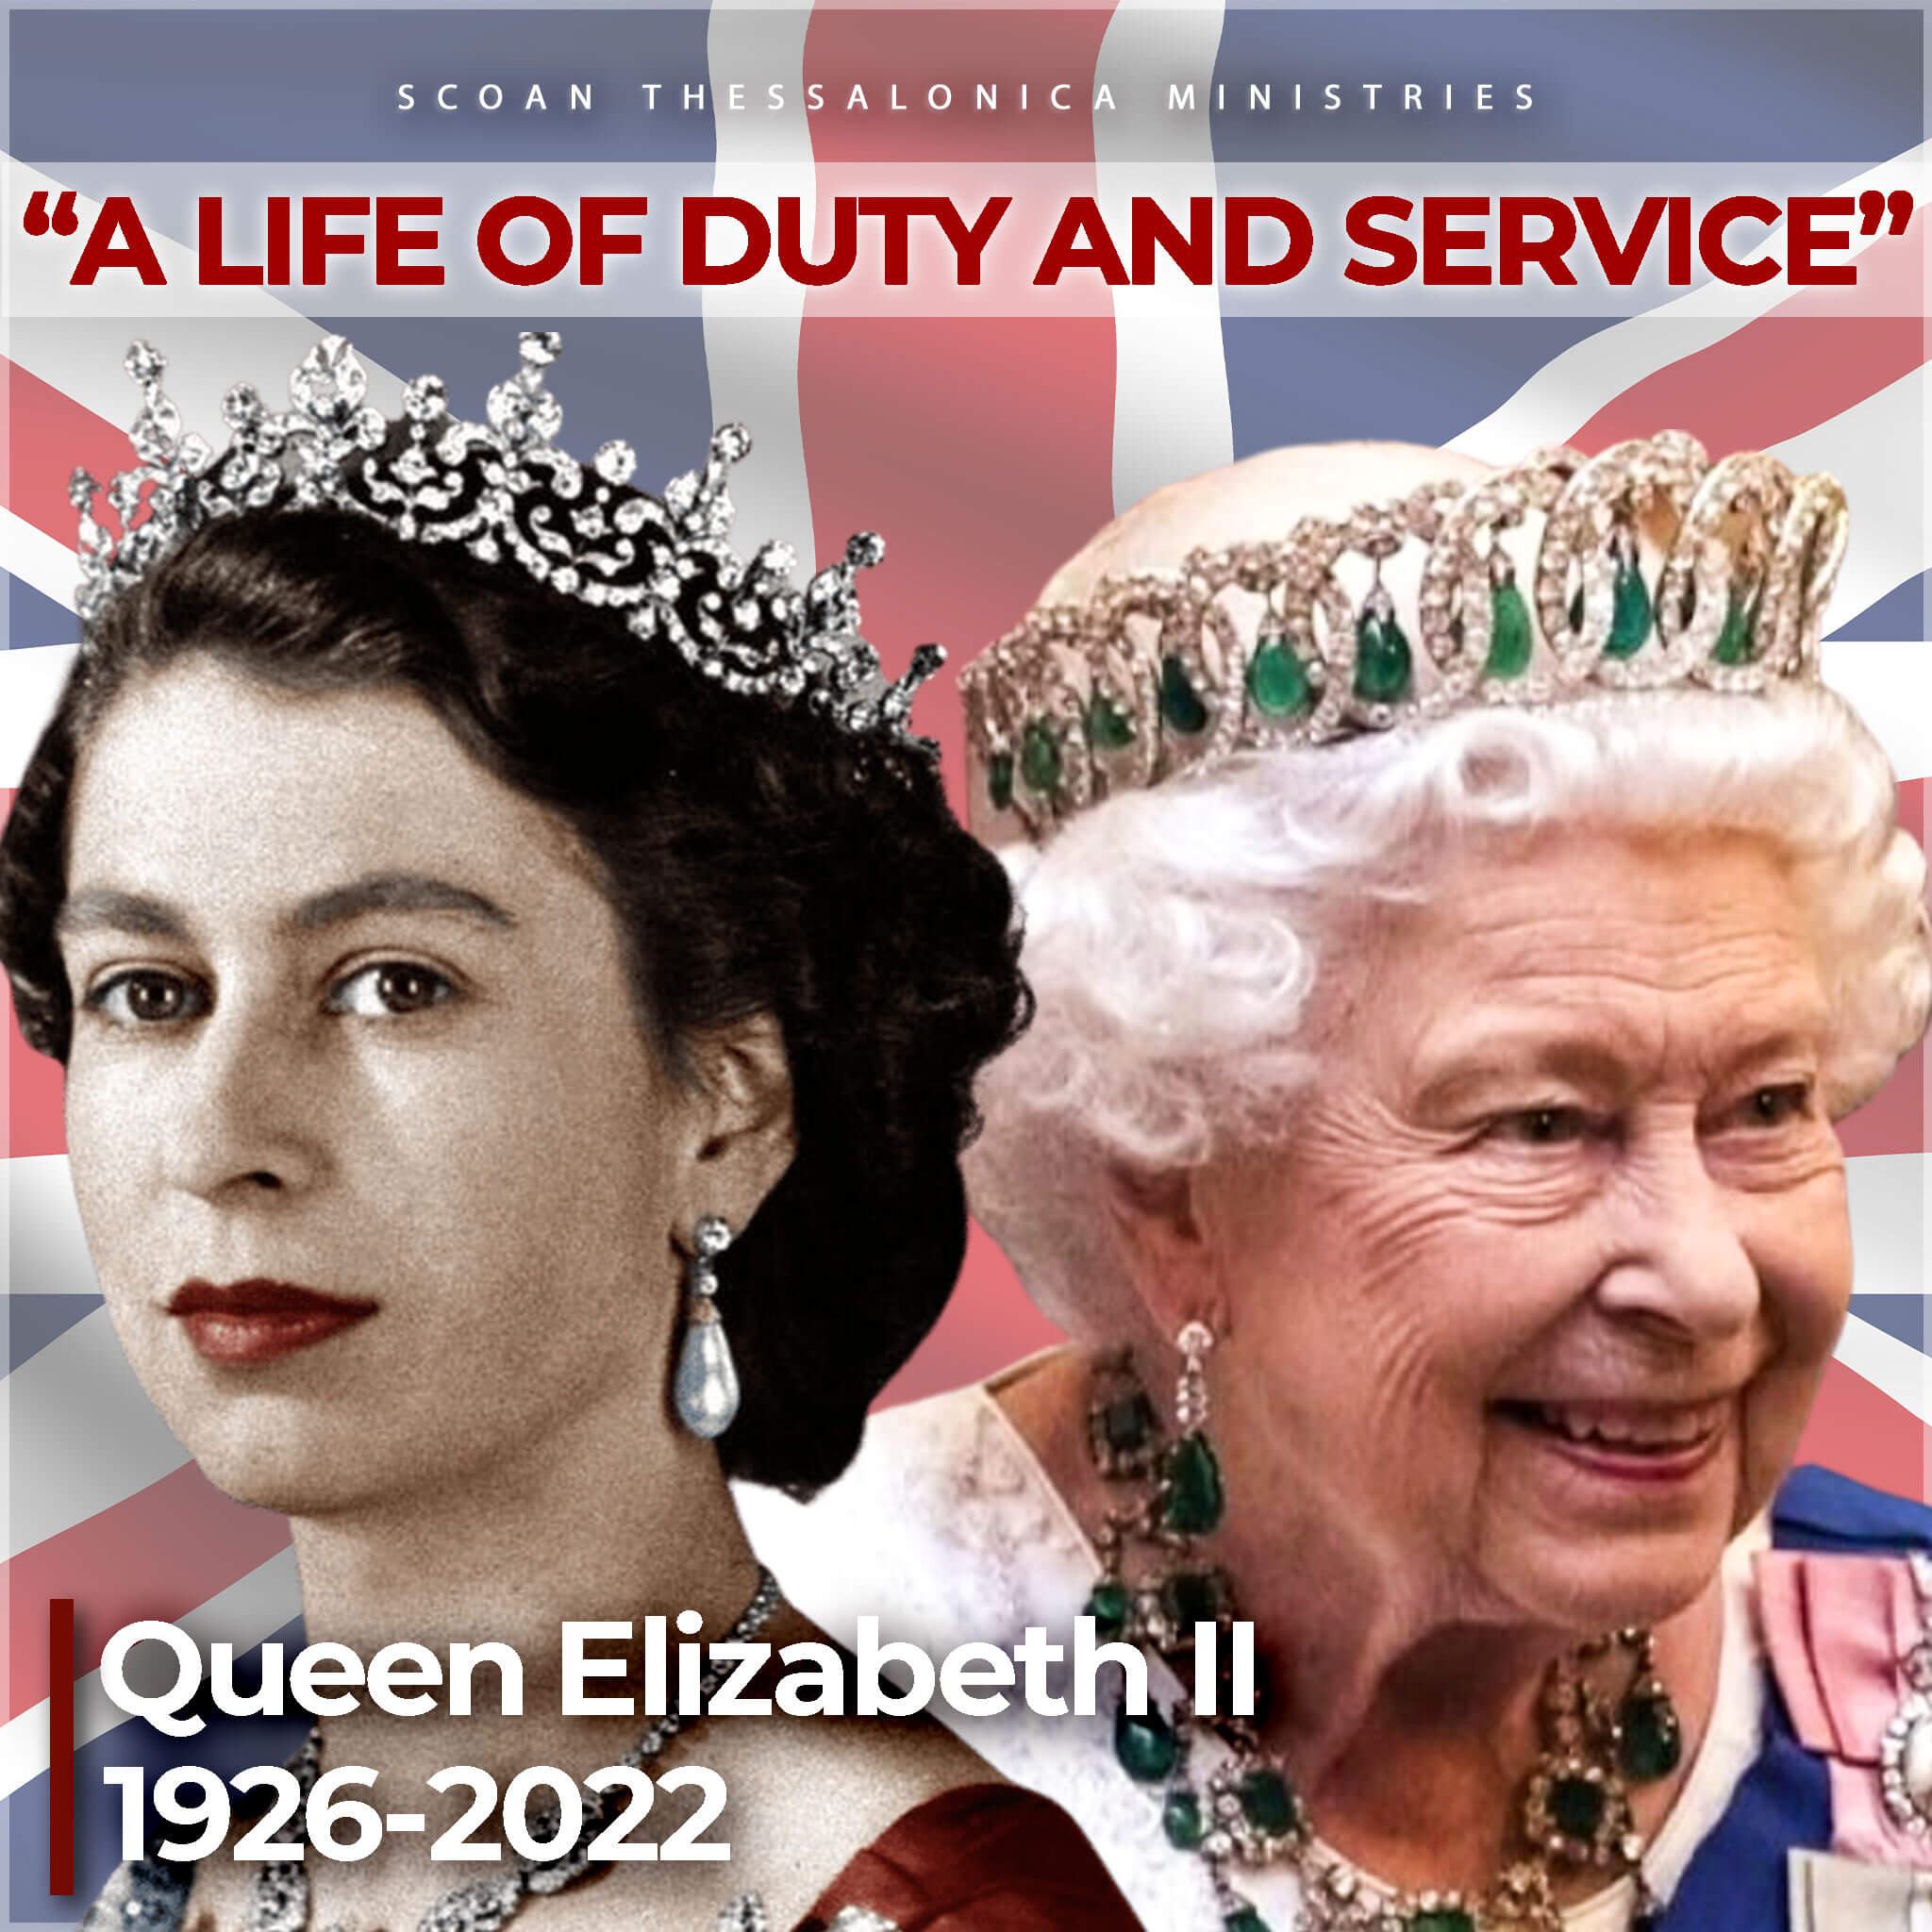 CONDOLENCE MESSAGE FOR THE PASSING OF HER MAJESTY, THE QUEEN ELIZABETH II